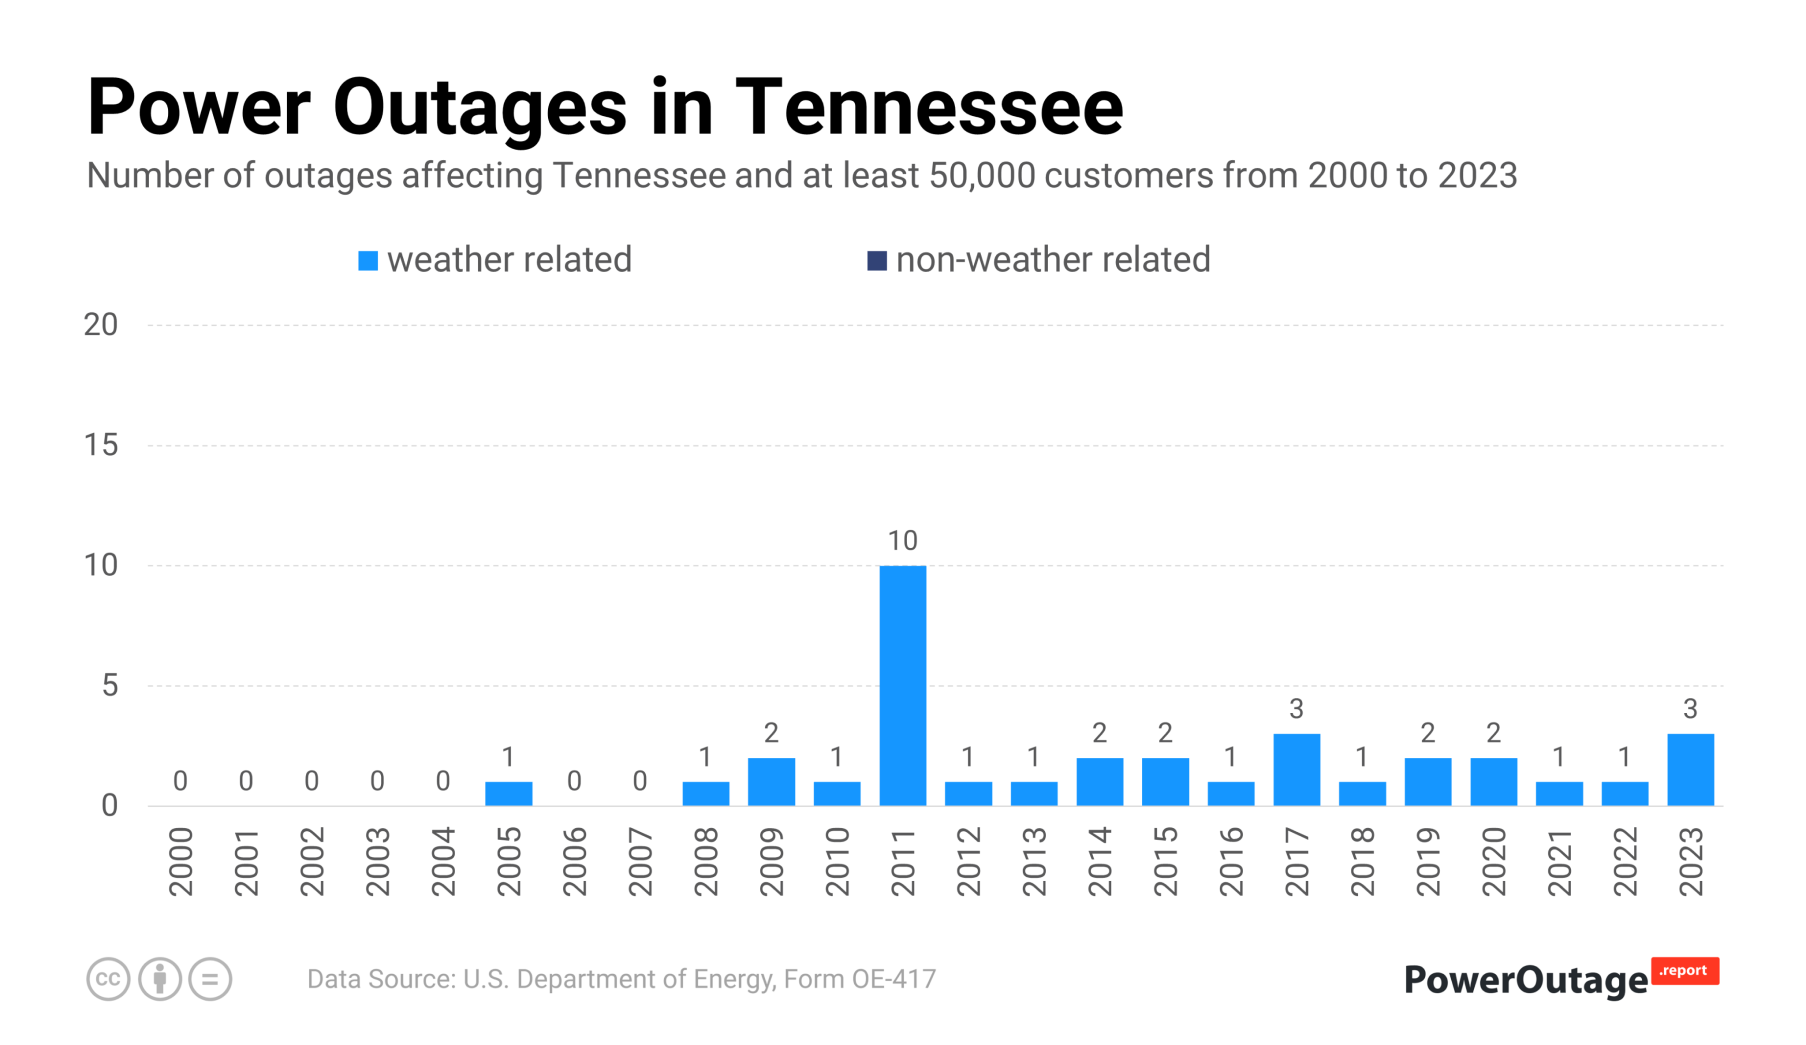 Tennessee Power Outage Statistics (2000 - 2021)